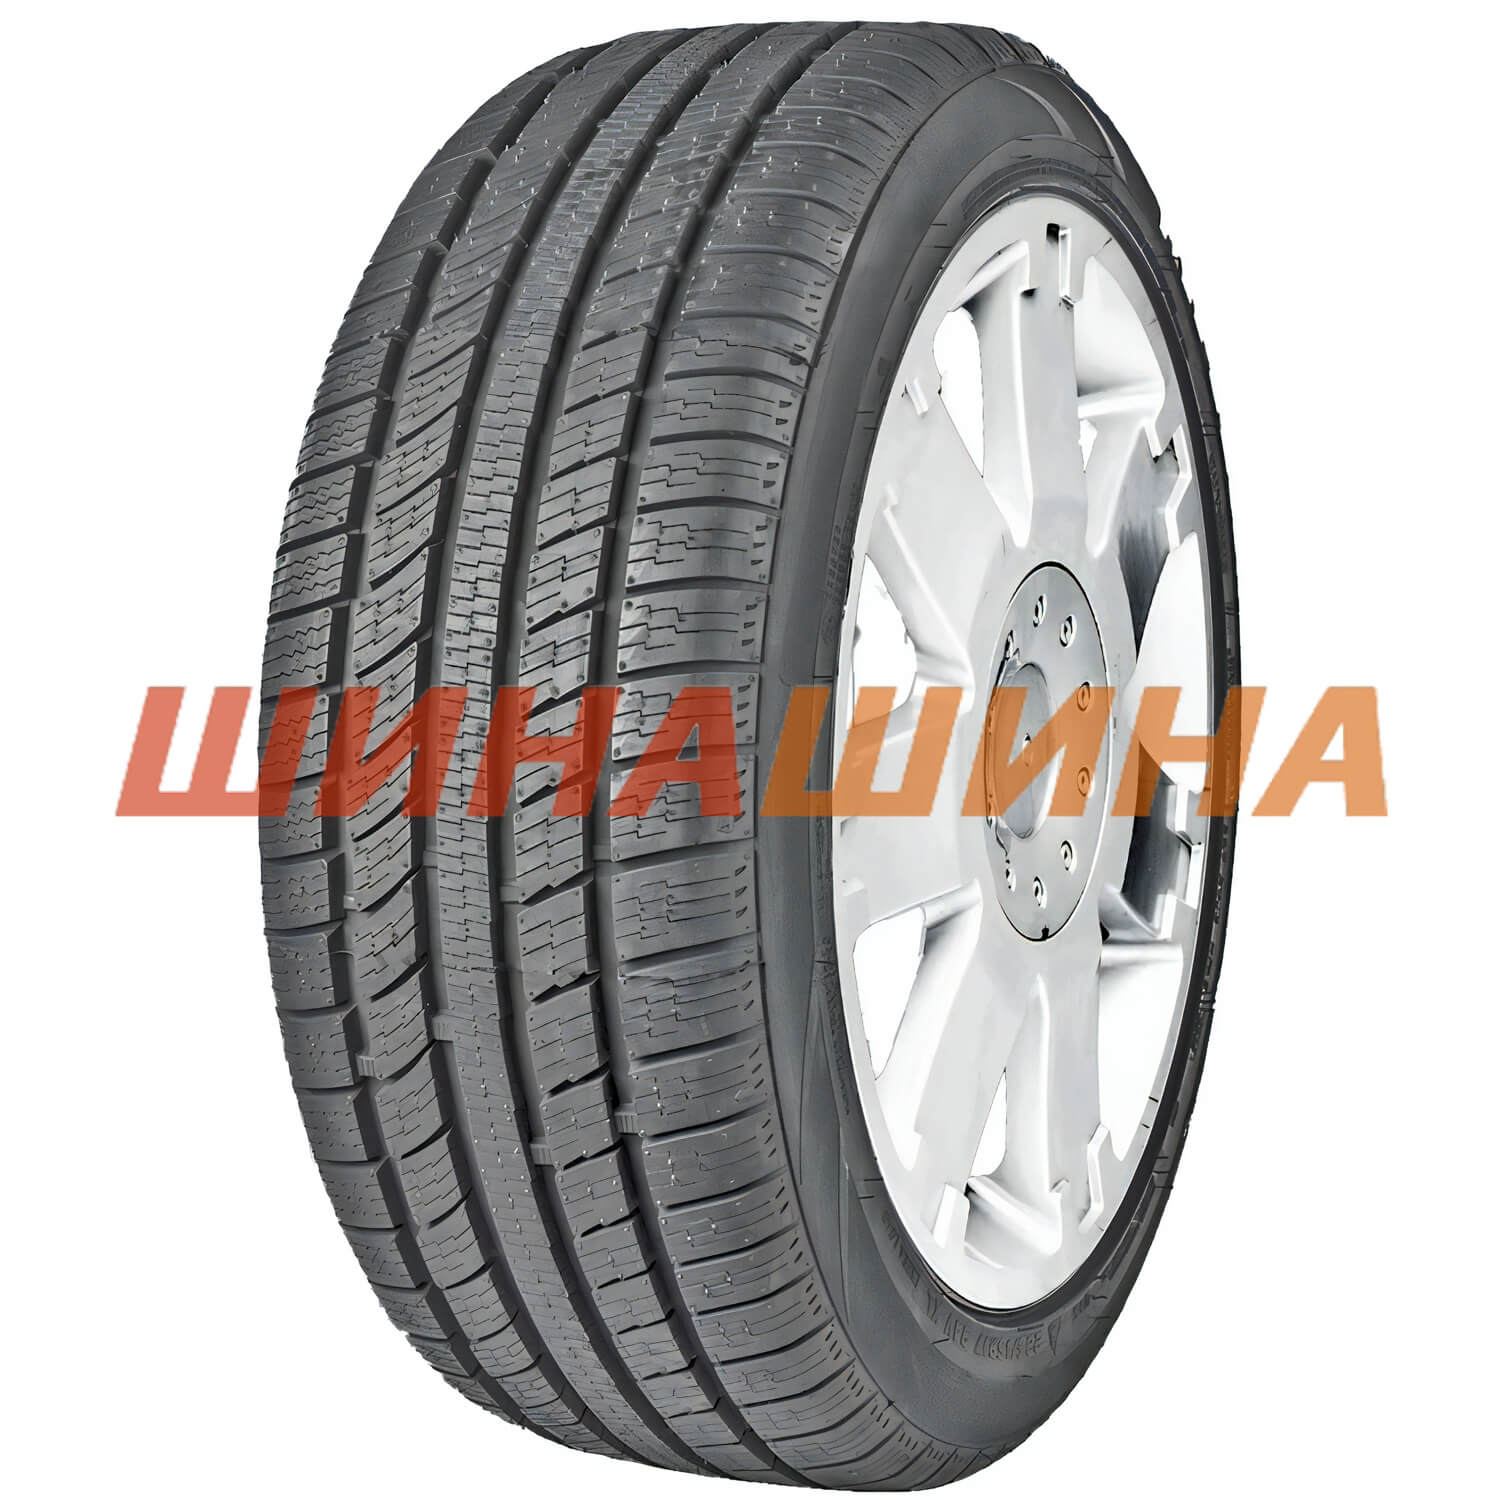 Mirage MR-762 AS 165/70 R14 81T